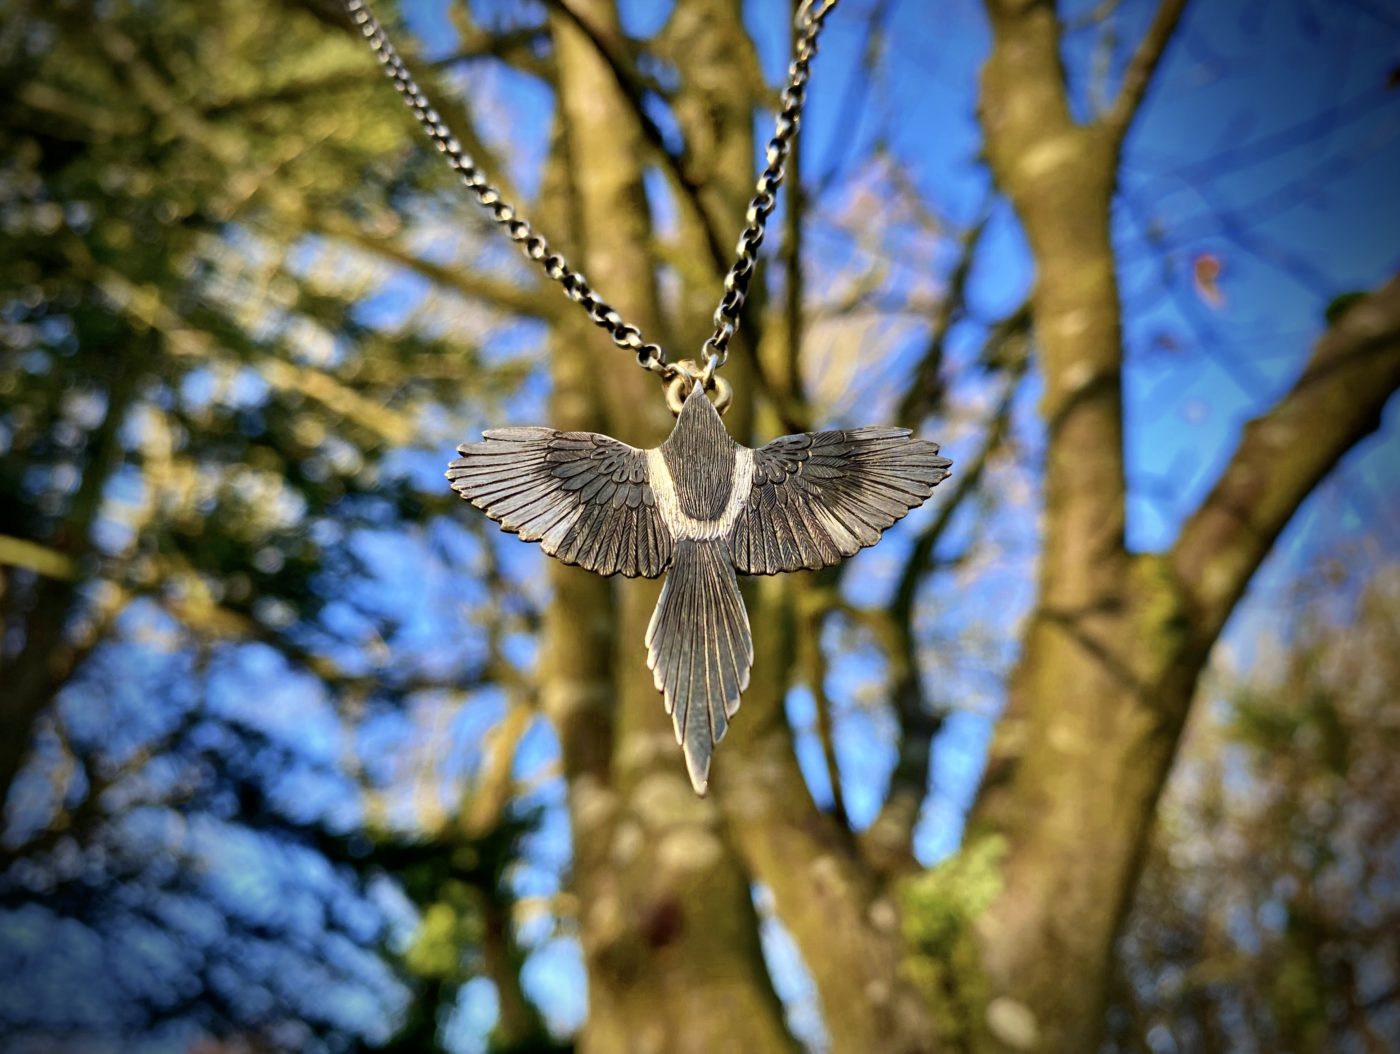 handcrafted Magpie jewellery made in Cambridge and Newcastle using ethical materials and techniques.